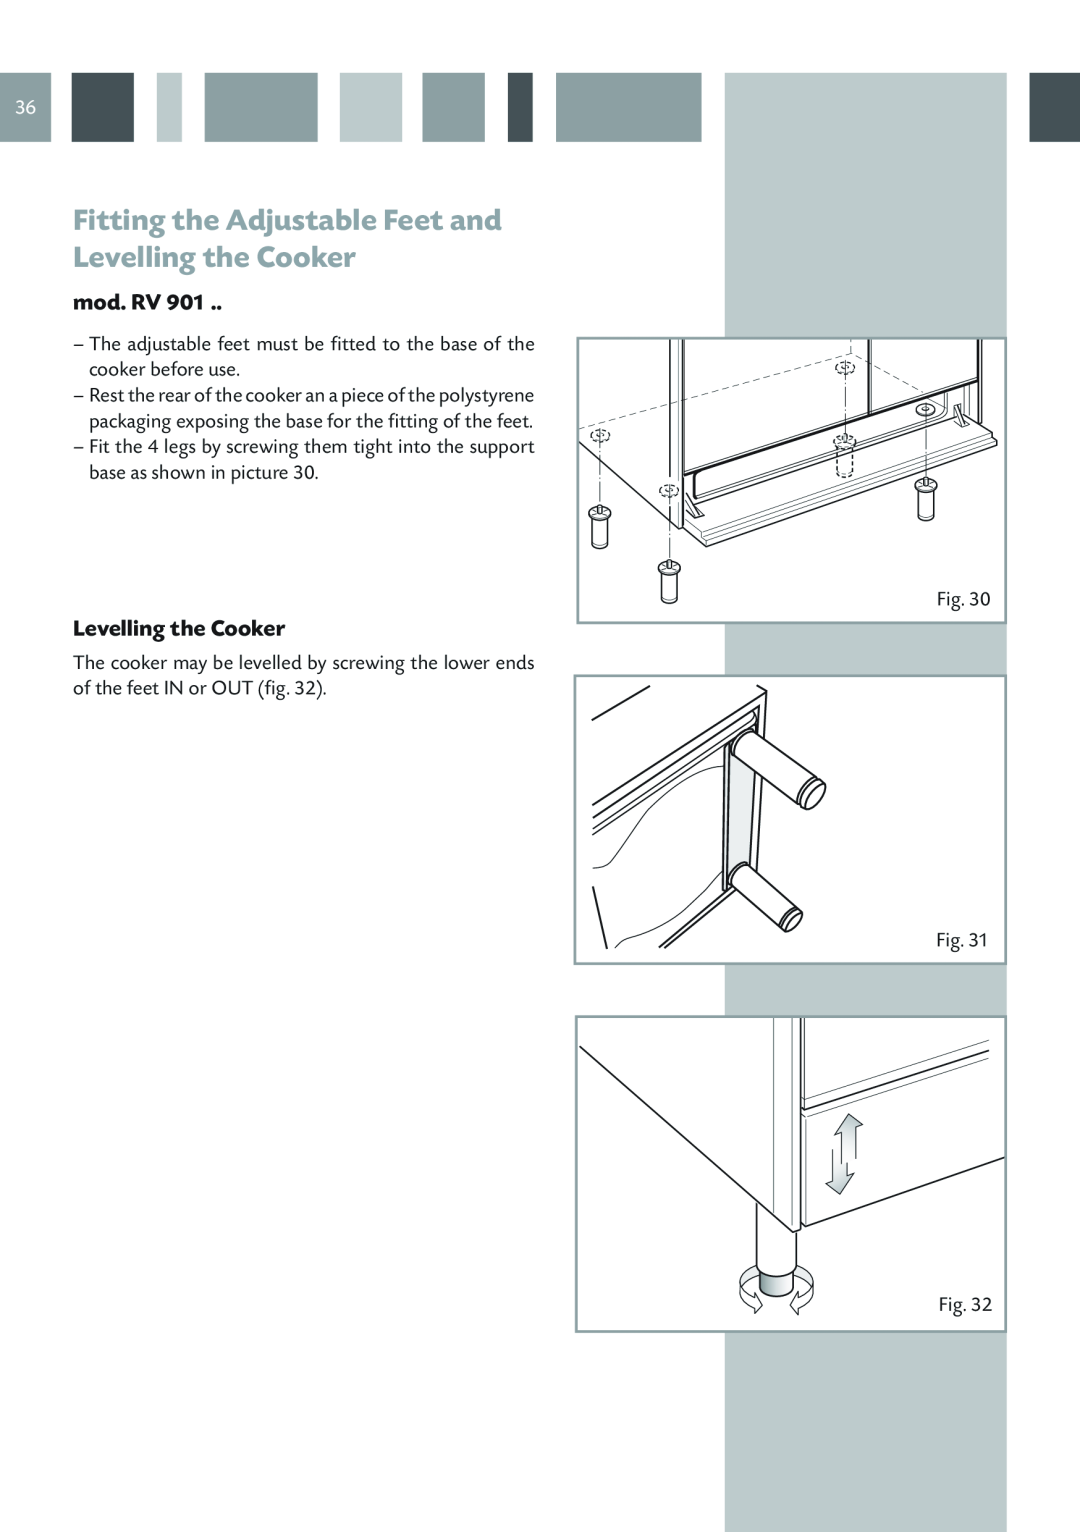 CDA RV 901, RV 1001 manual Fitting the Adjustable Feet and Levelling the Cooker, mod. RV 